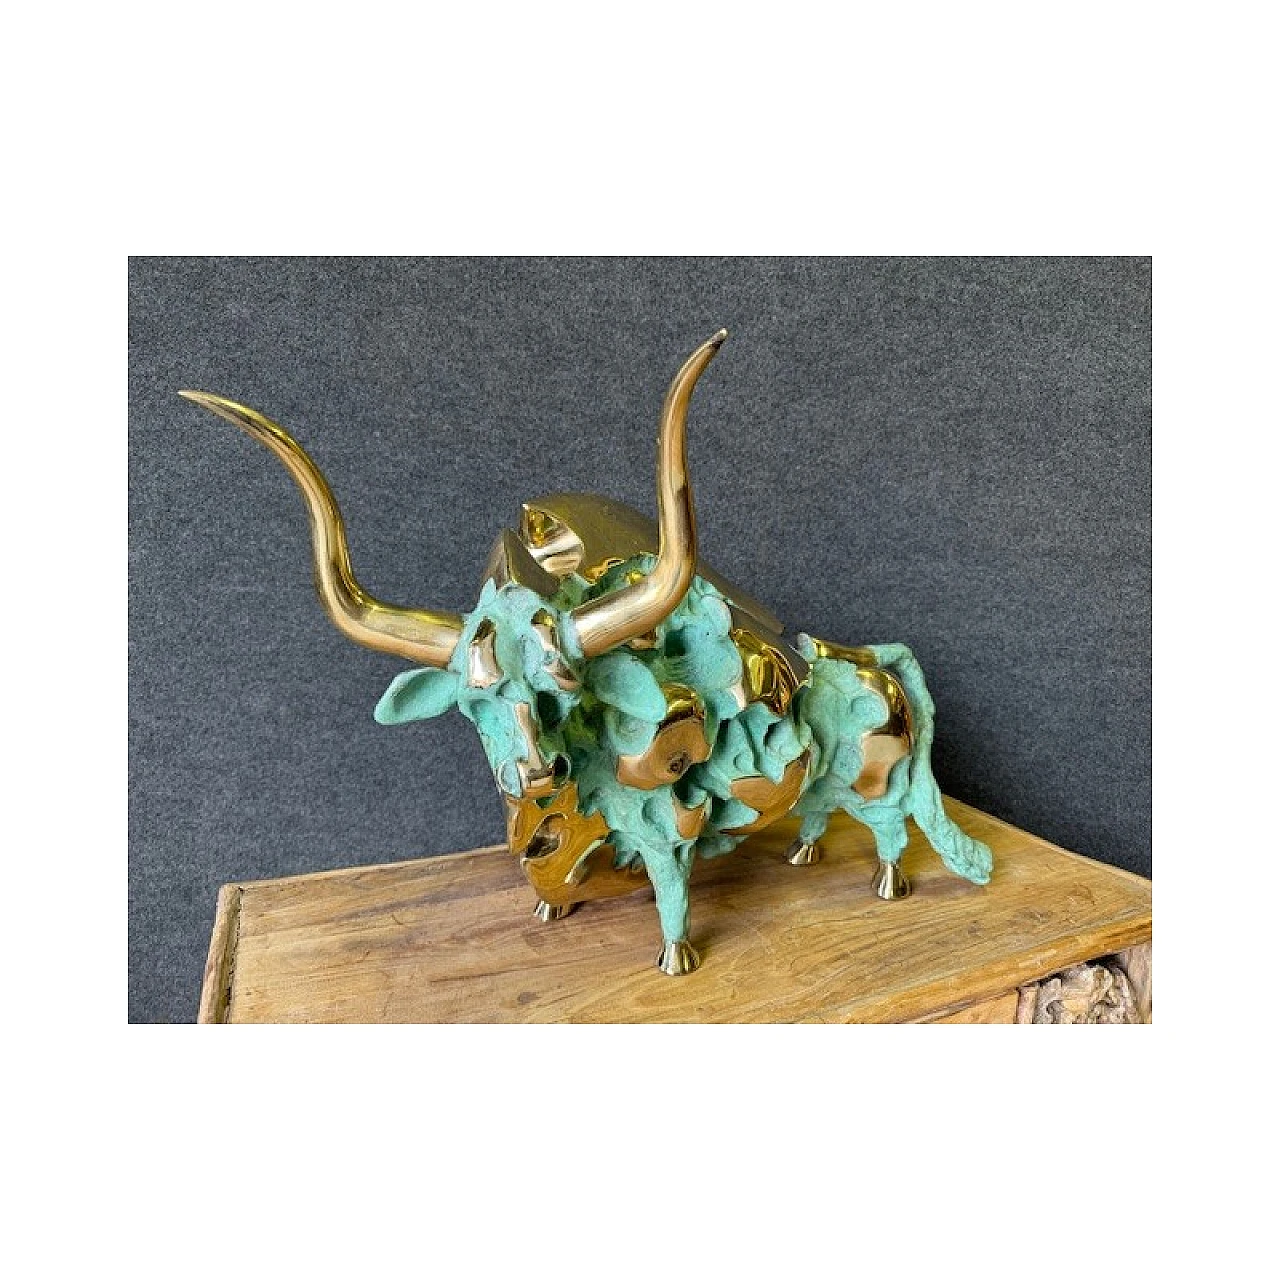 Oxidized and polished bronze bull sculpture 4